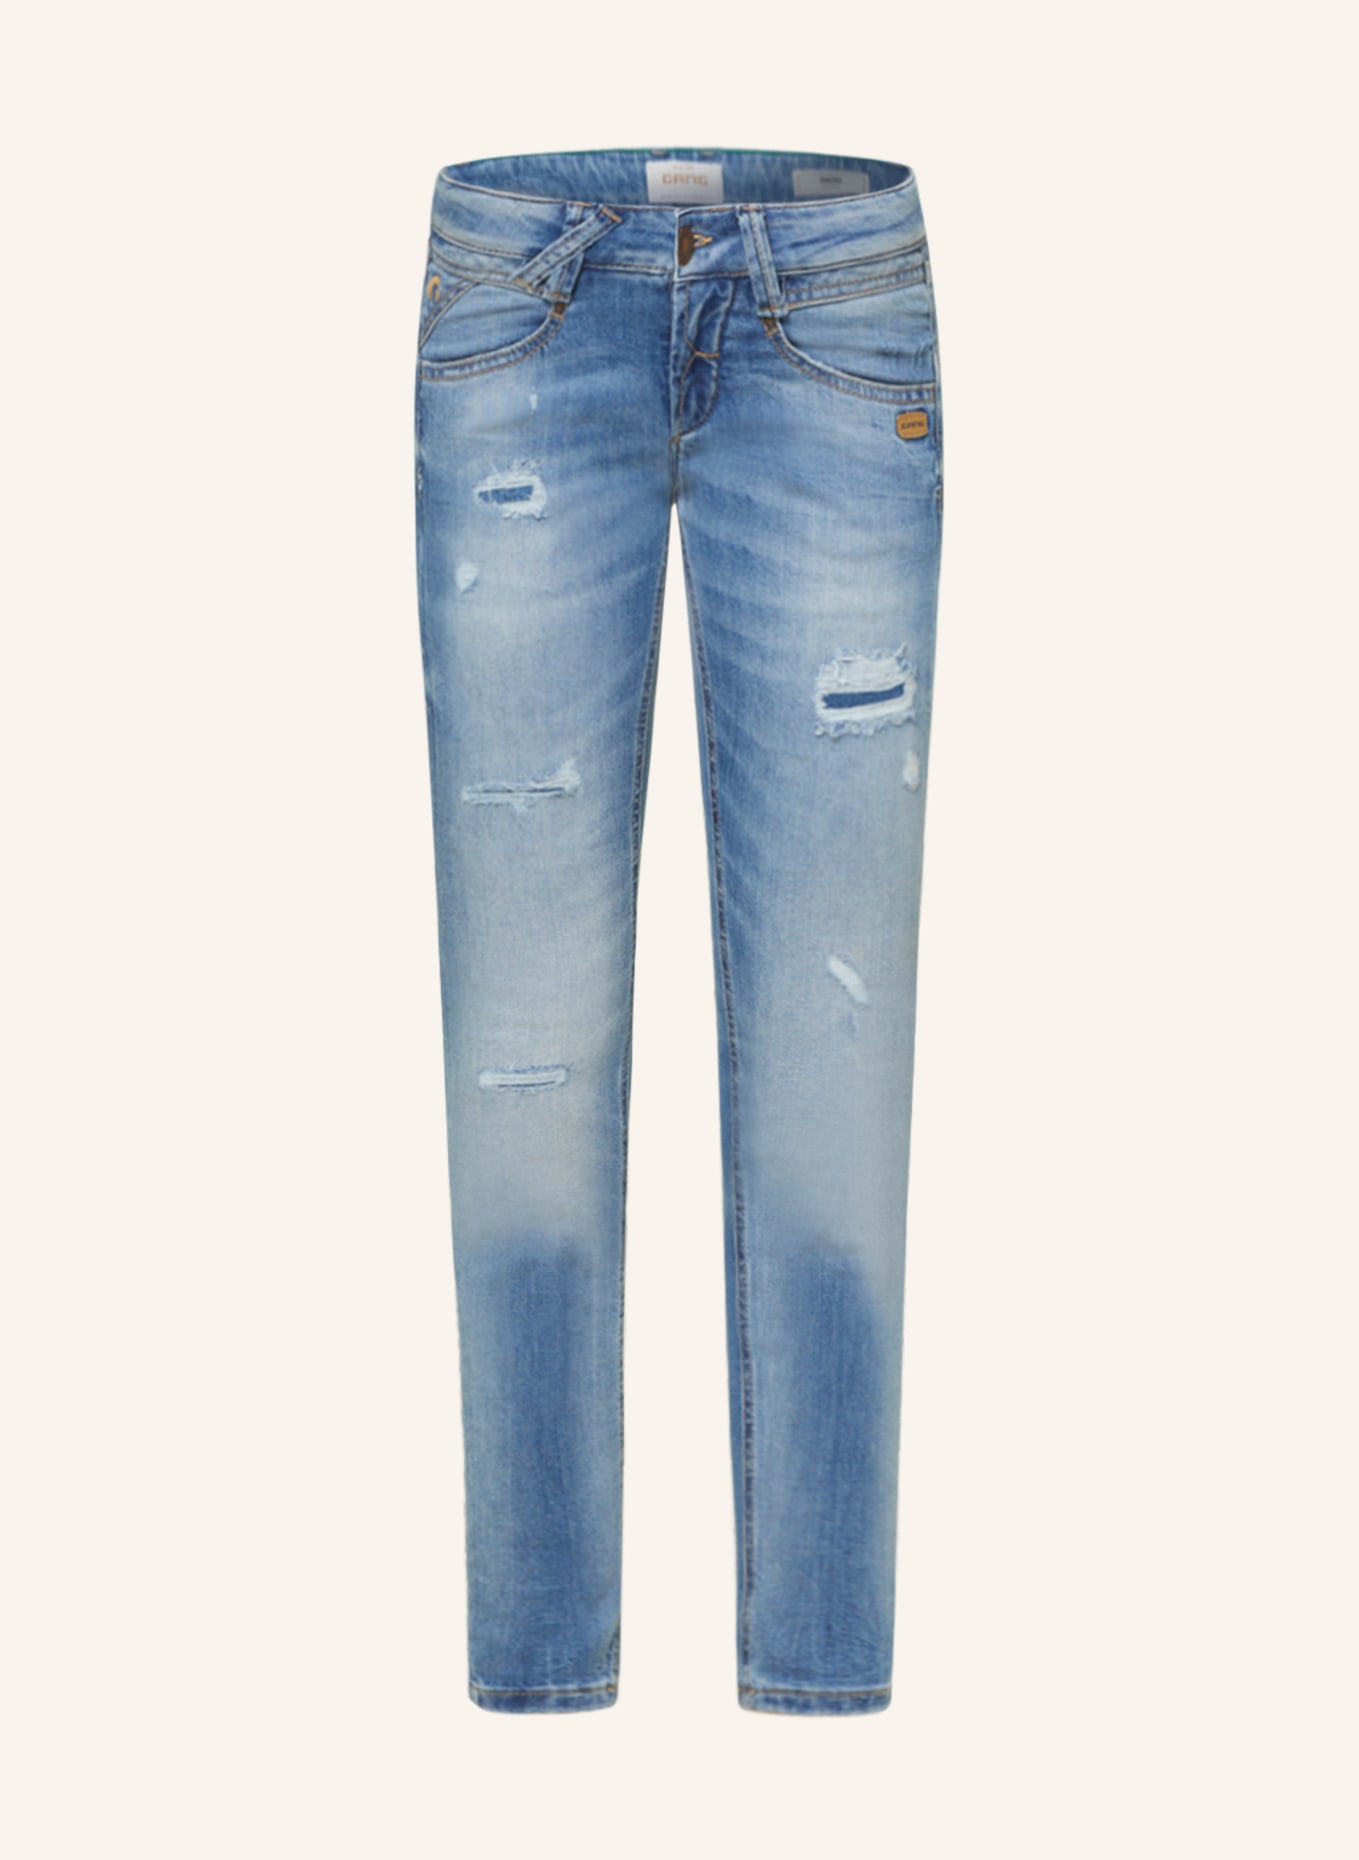 GANG Skinny jeans NENA, Color: 7905 authentic Jeans (Image 1)